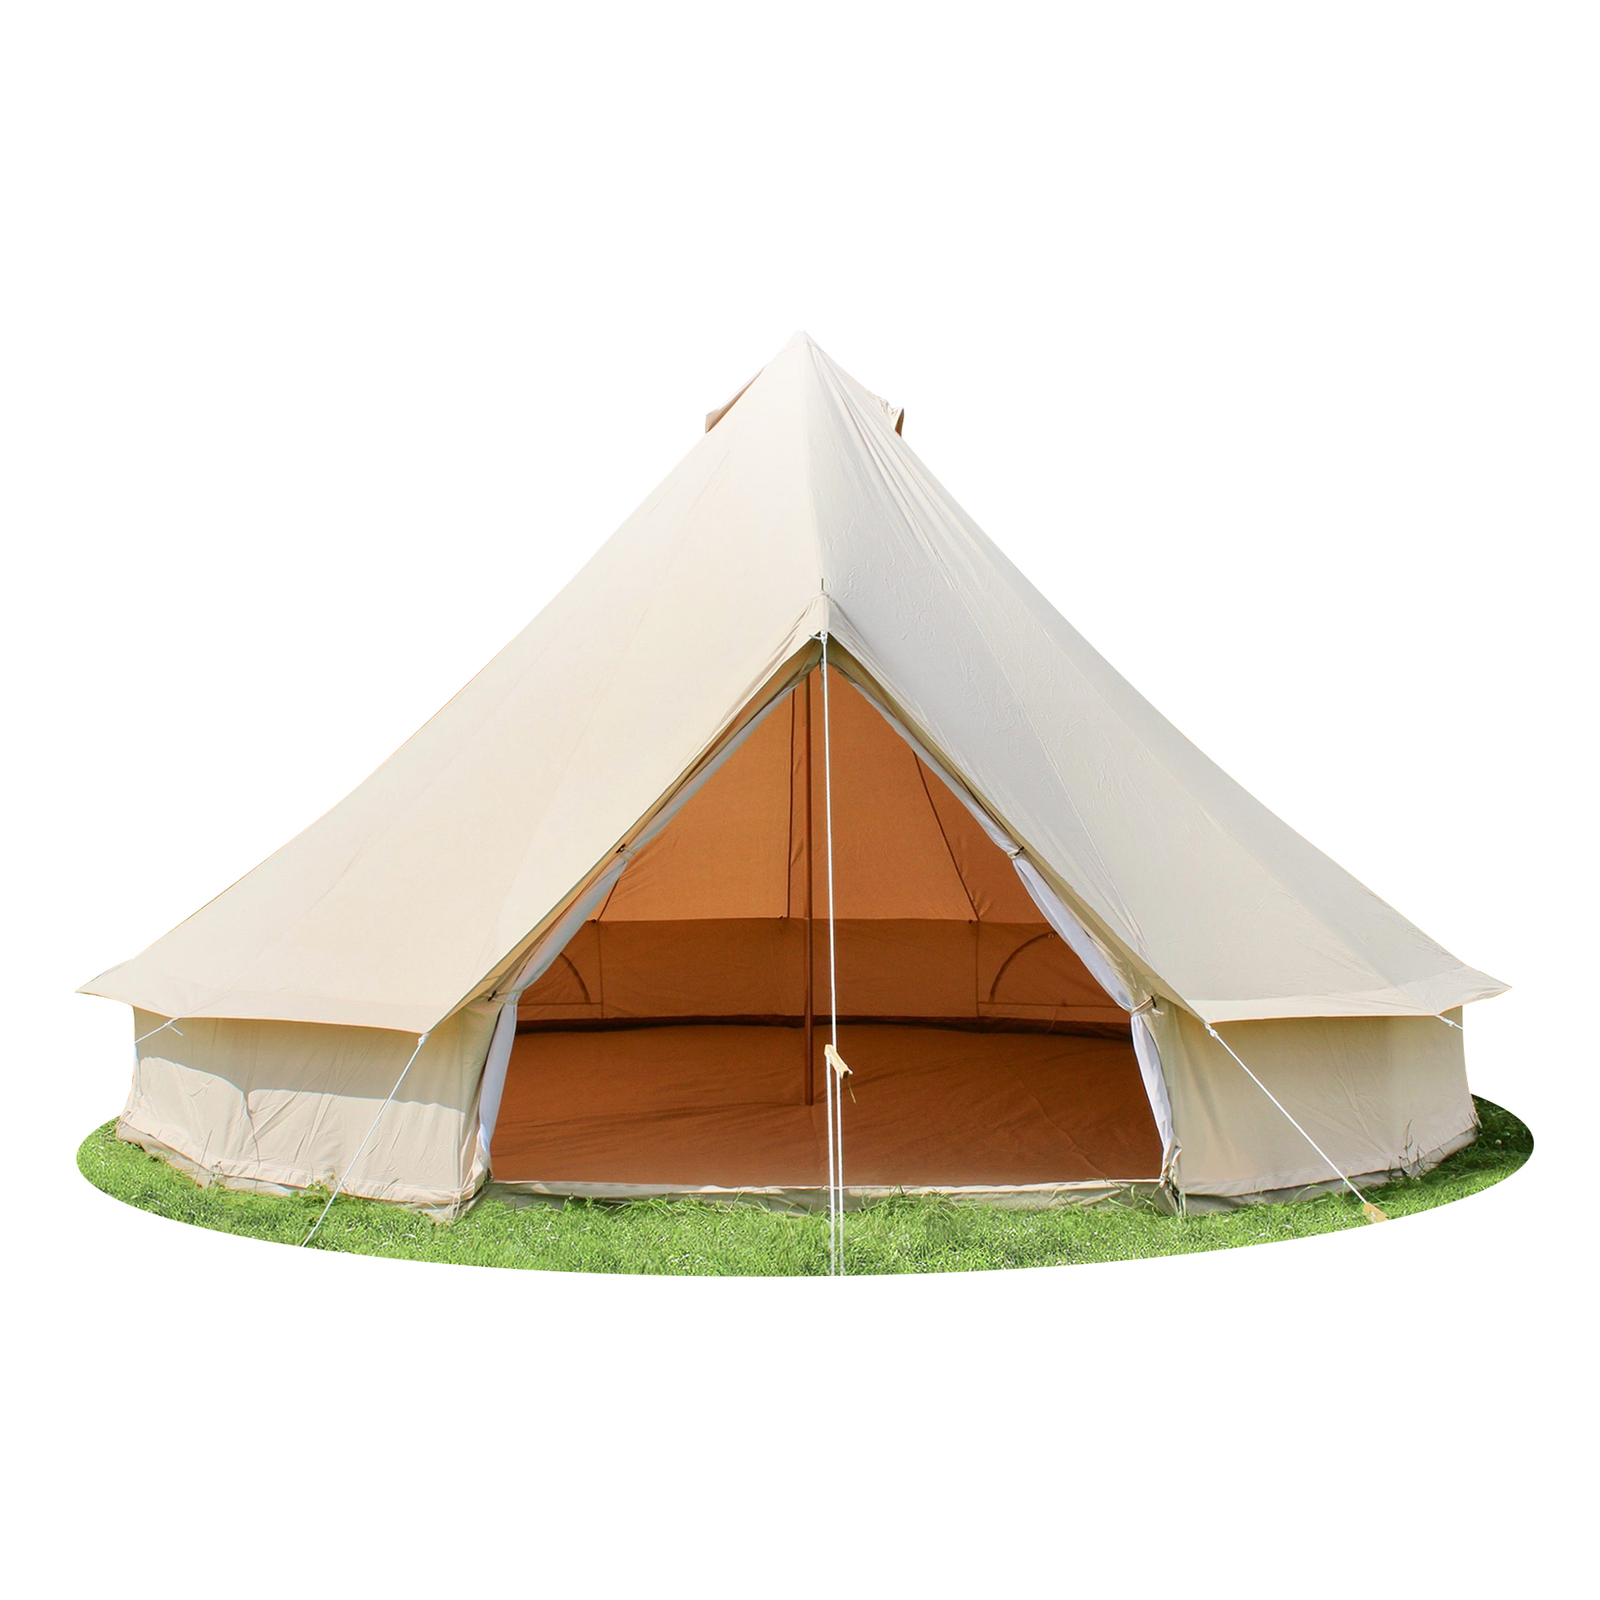 5M 4-Season Bell Tent Waterproof Canvas Glamping Yurt Teepee Tents Commercial Grade Belltent